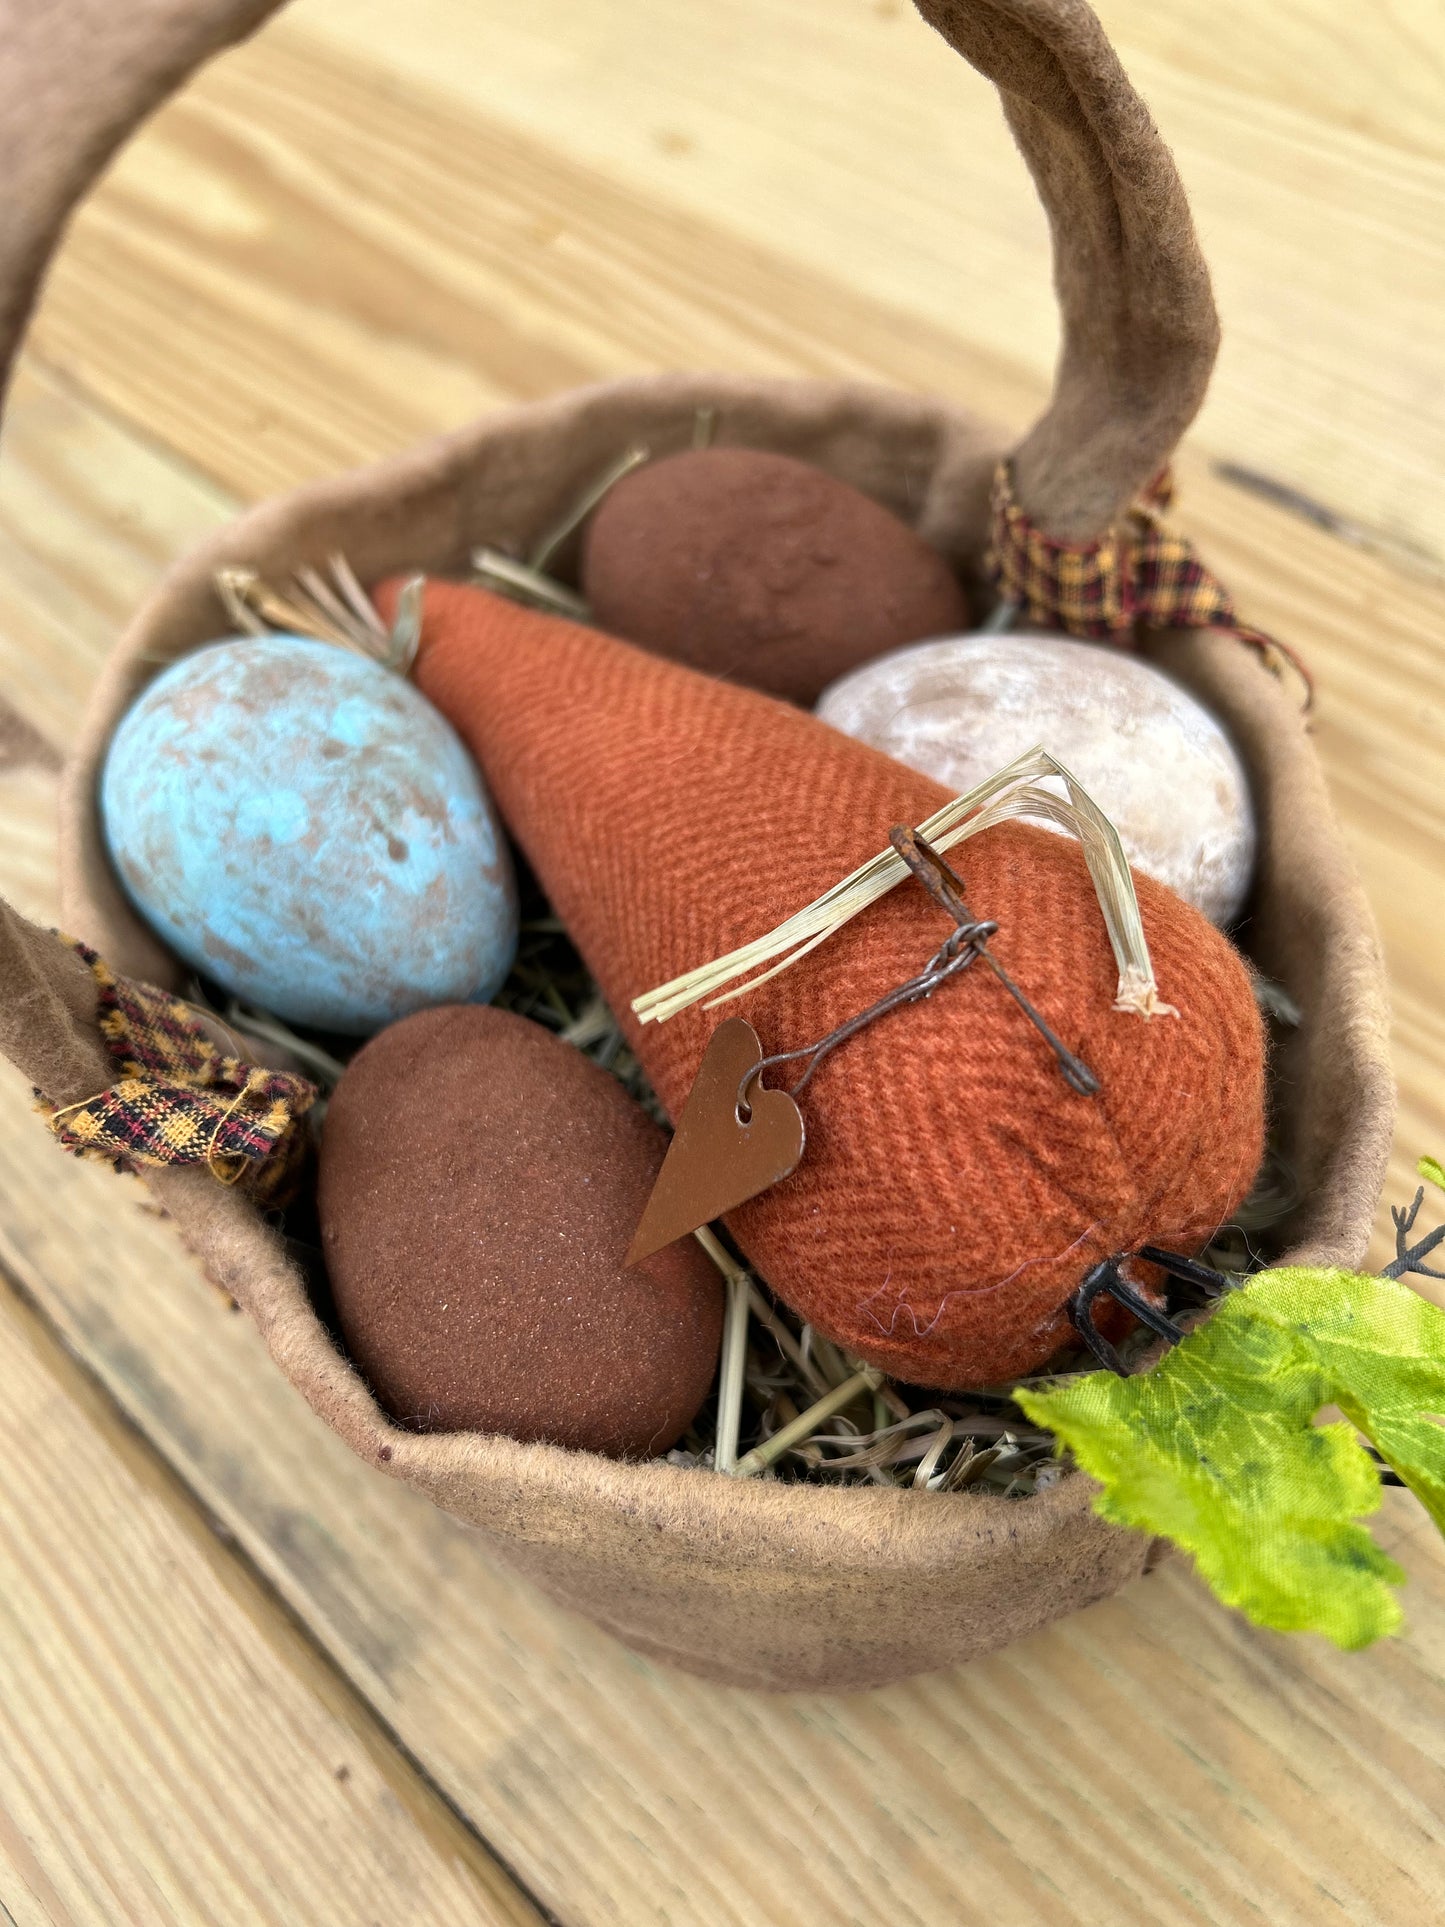 Handmade Primitive Easter Basket with Eggs and Carrots, Farmhouse Easter Decor, Primitives